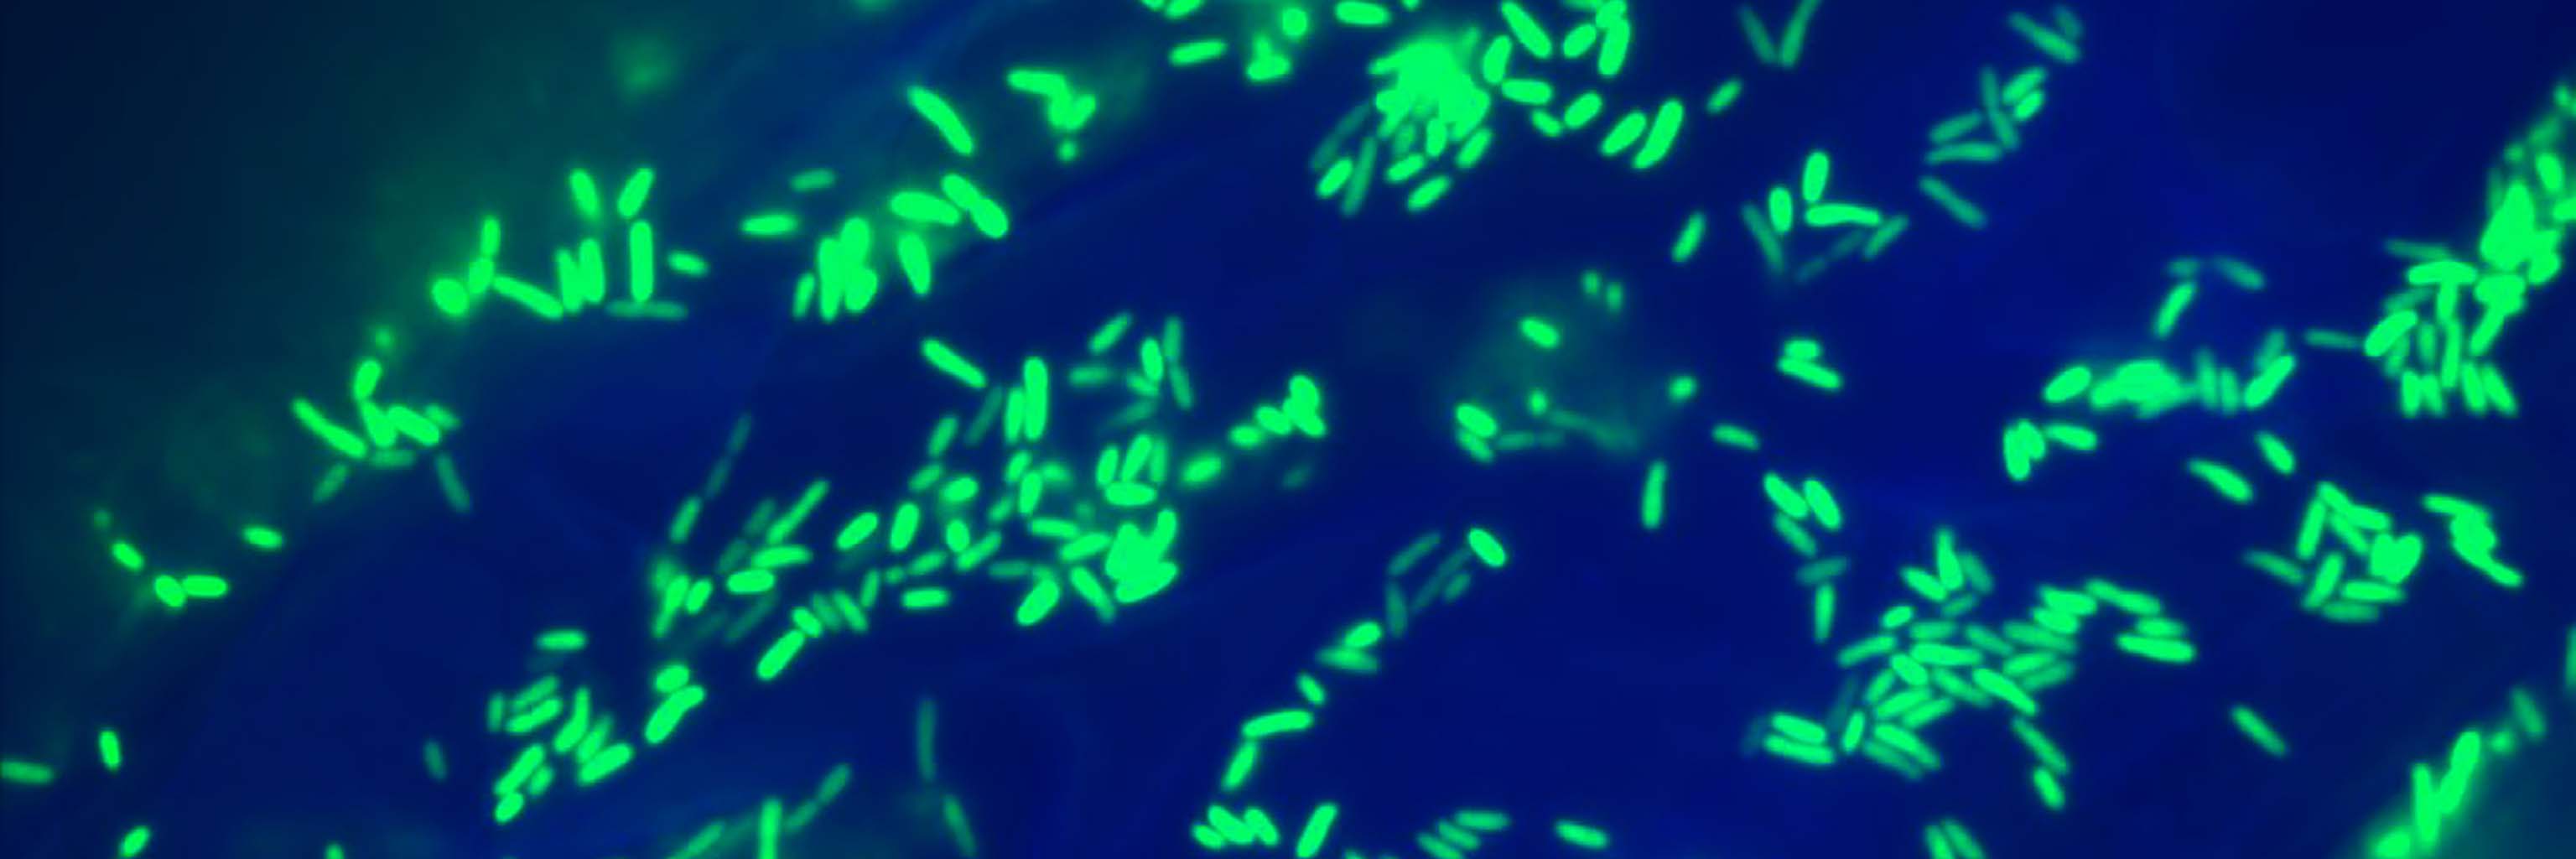 Fluorescence micrograph of Agrobacterium tumefaciens, a plant pathogenic bacterial species, on the root surface of the model plant Arabidopsis thaliana (mouse-ear cress). Each of the rod-shaped cells is about 2 microns in length. The plant root autofluoresces, but the bacteria are expressing green fluorescent protein (GFP) originally from jellyfish.